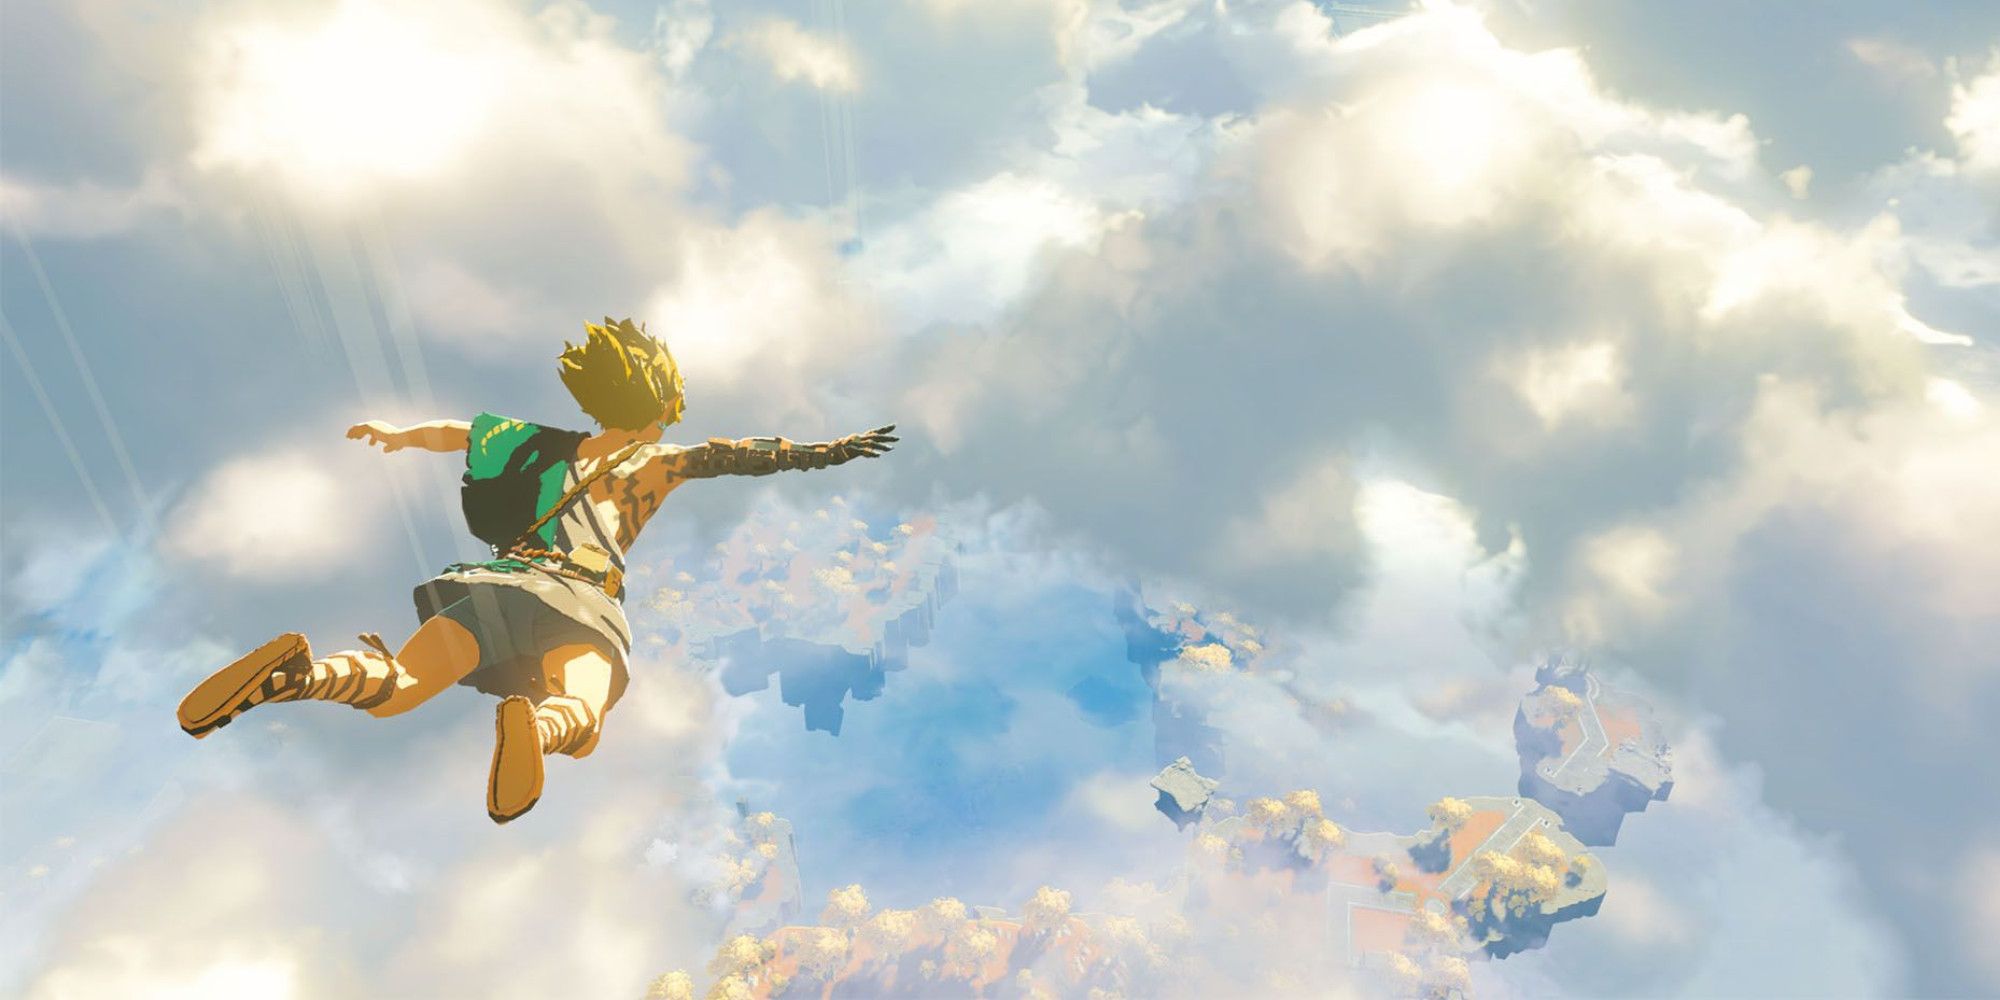 Link falling through the sky in The Legend Of Zelda: Tears of the Kingdom